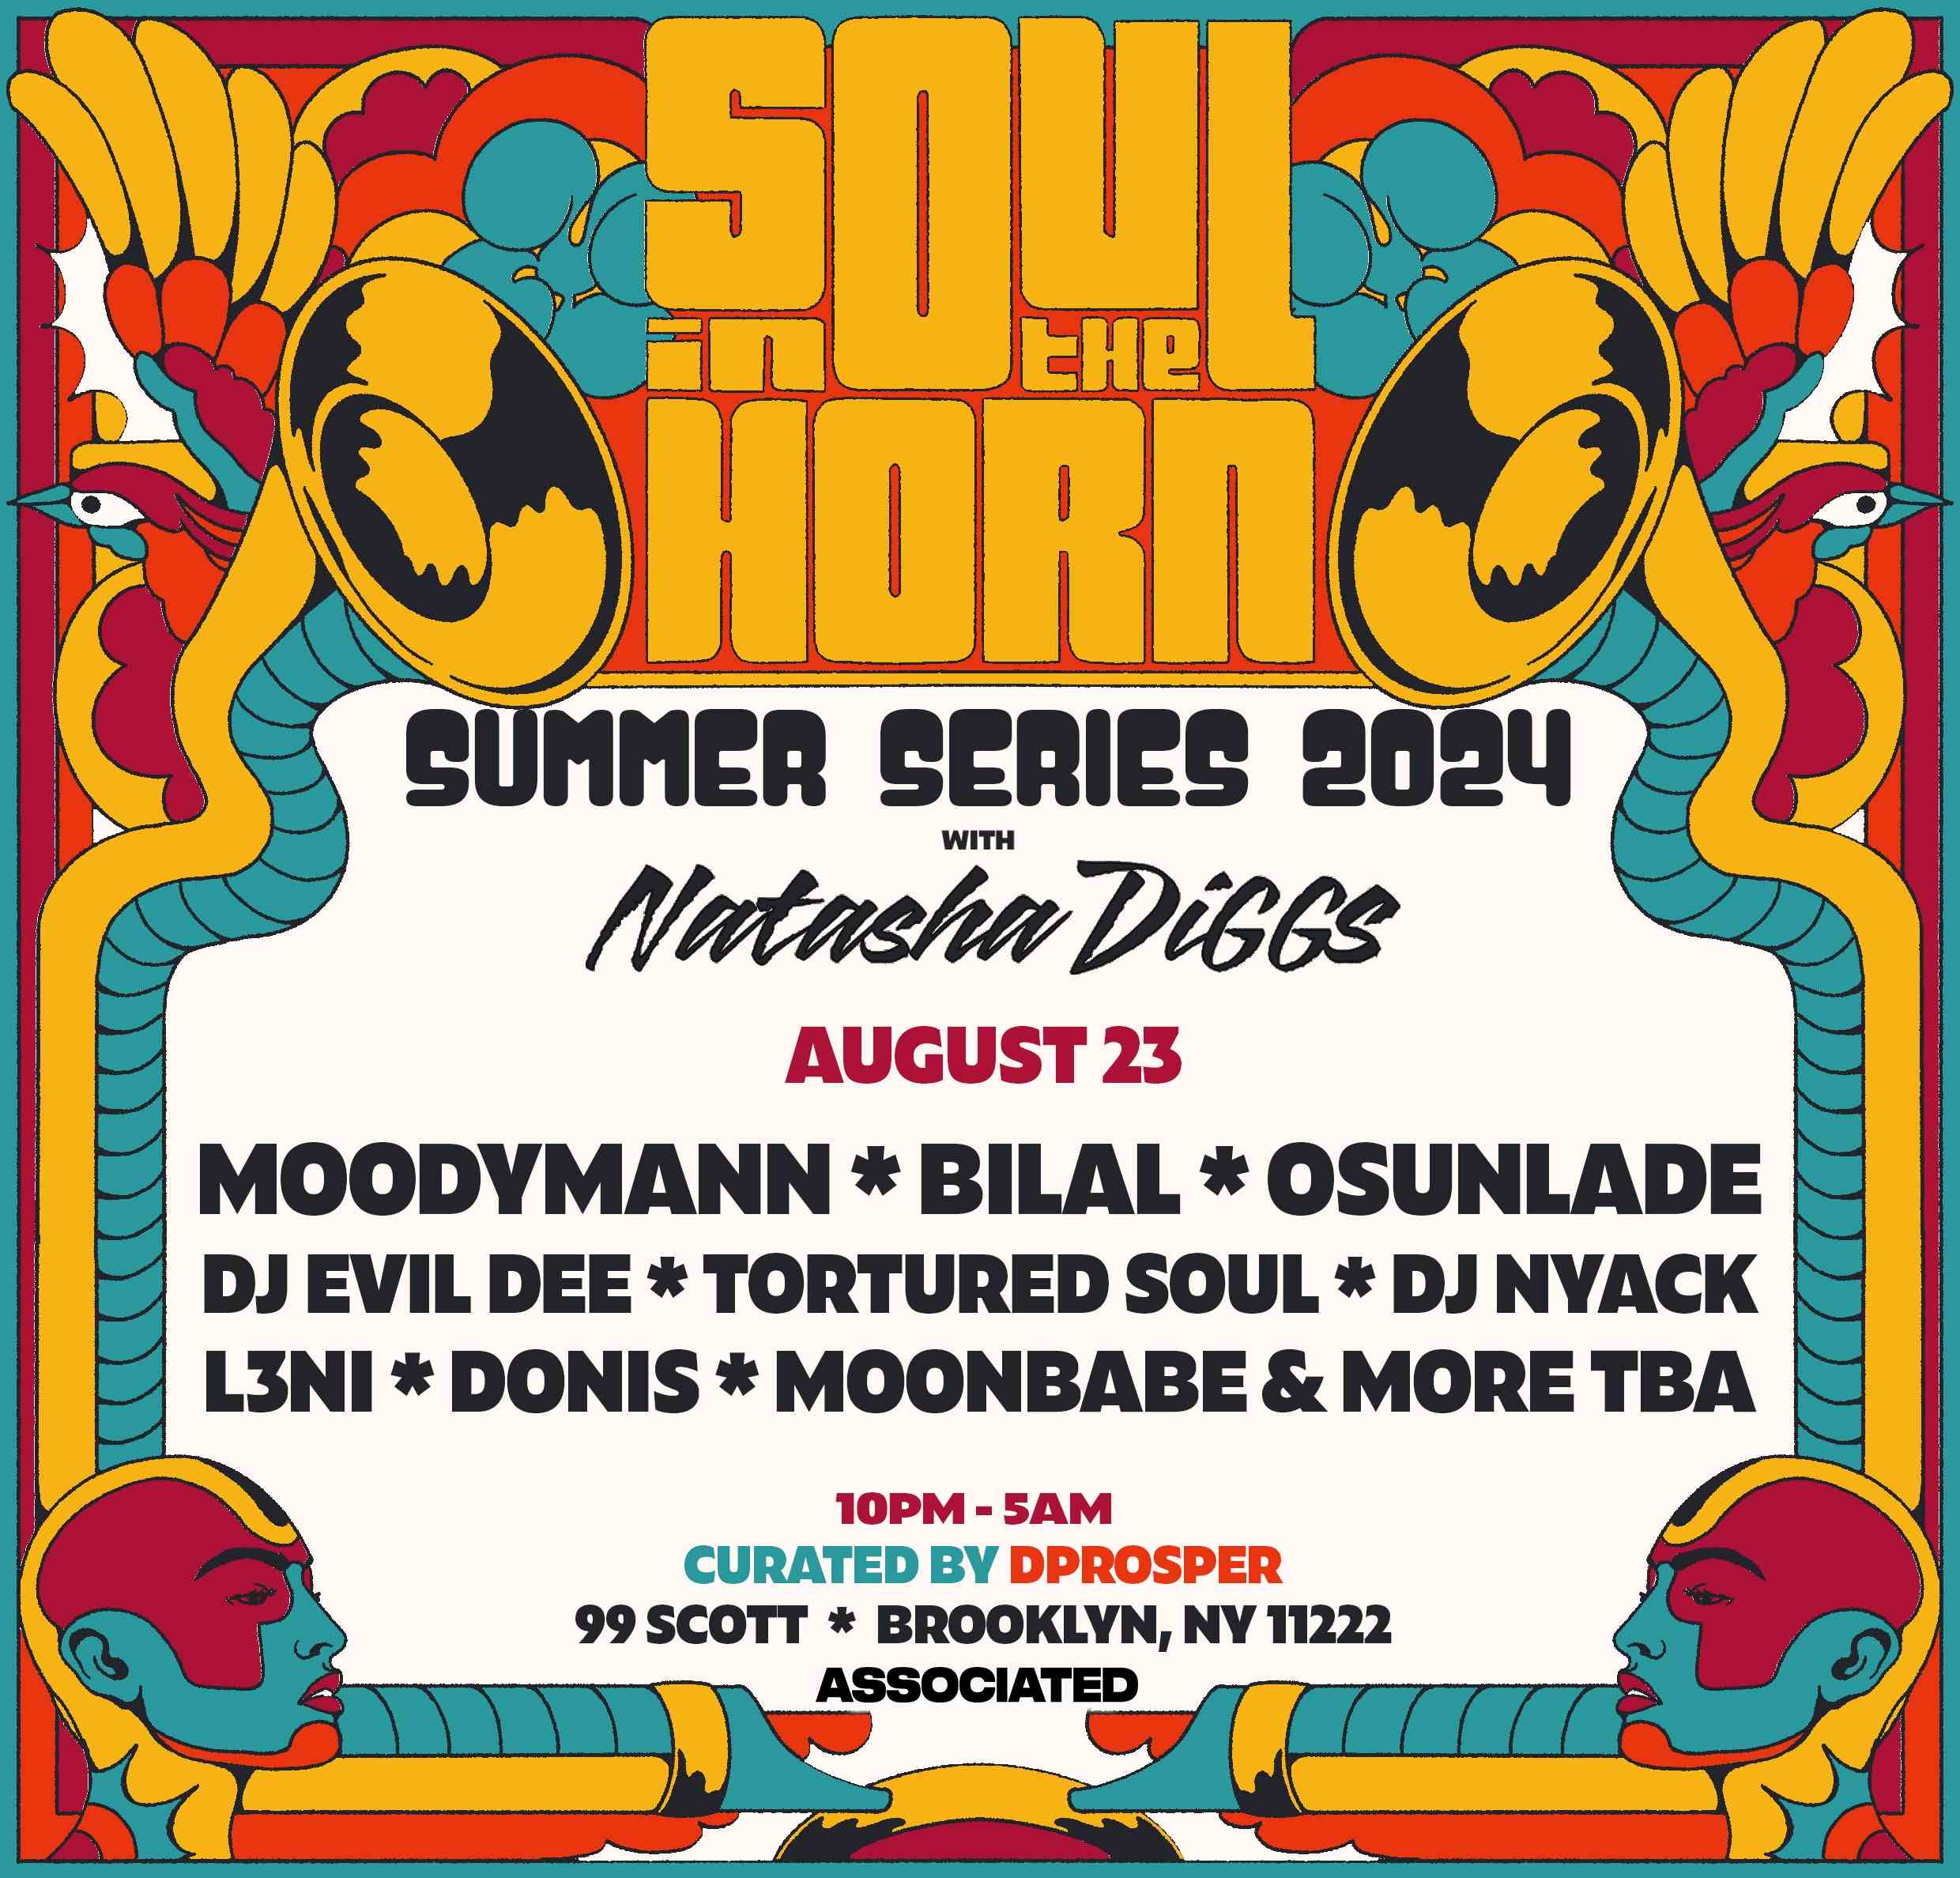 Soul in the Horn Summer Series event flyer